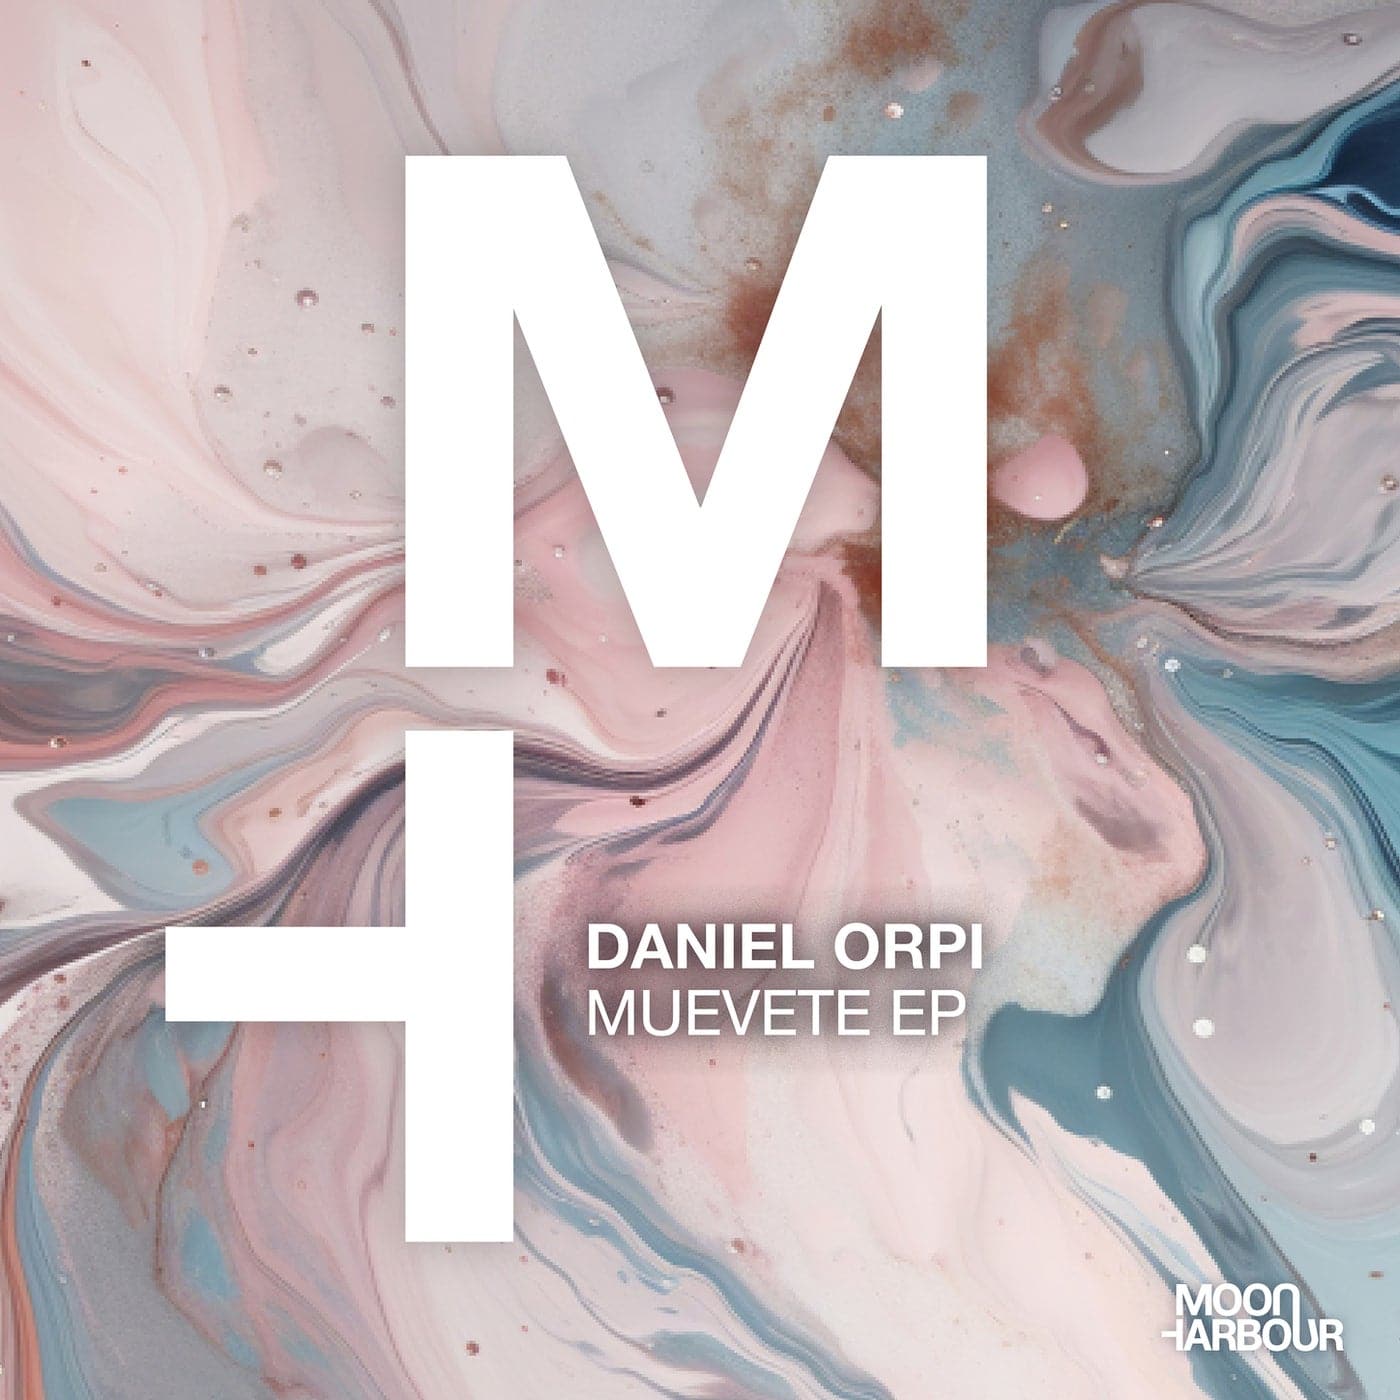 image cover: Muevete EP by Daniel Orpi on Moon Harbour Recordings